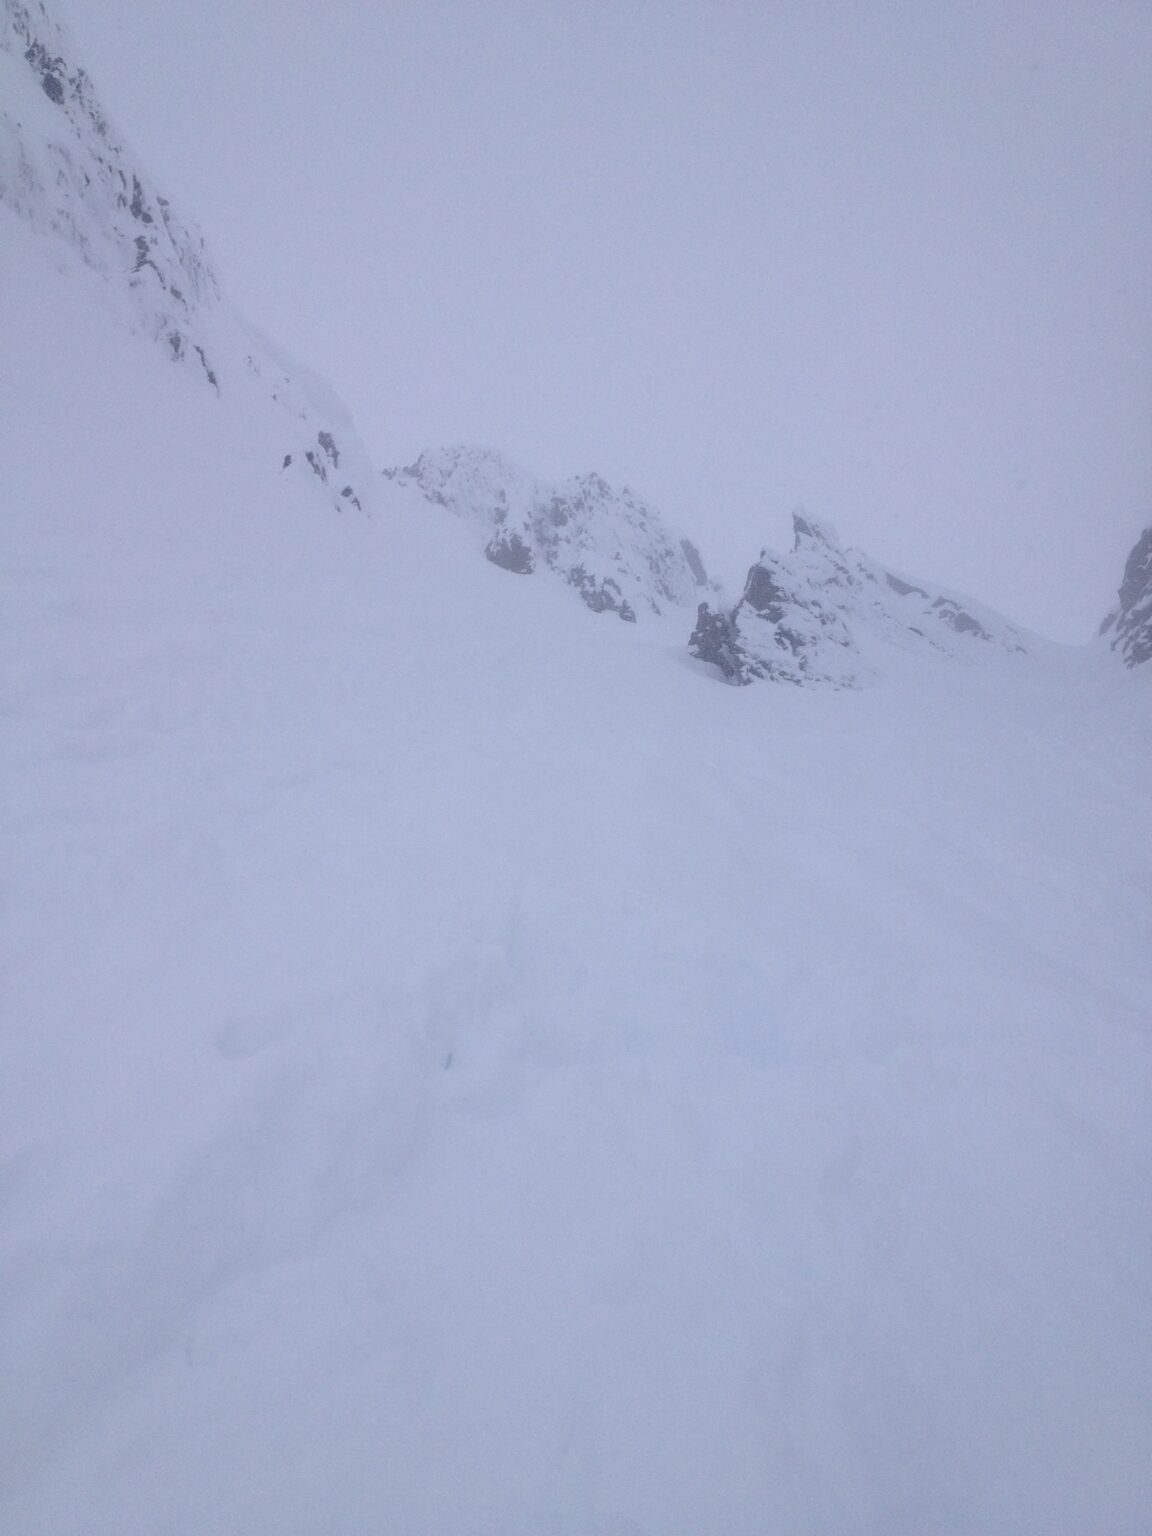 Looking up the North Chute of Store Kjostinden